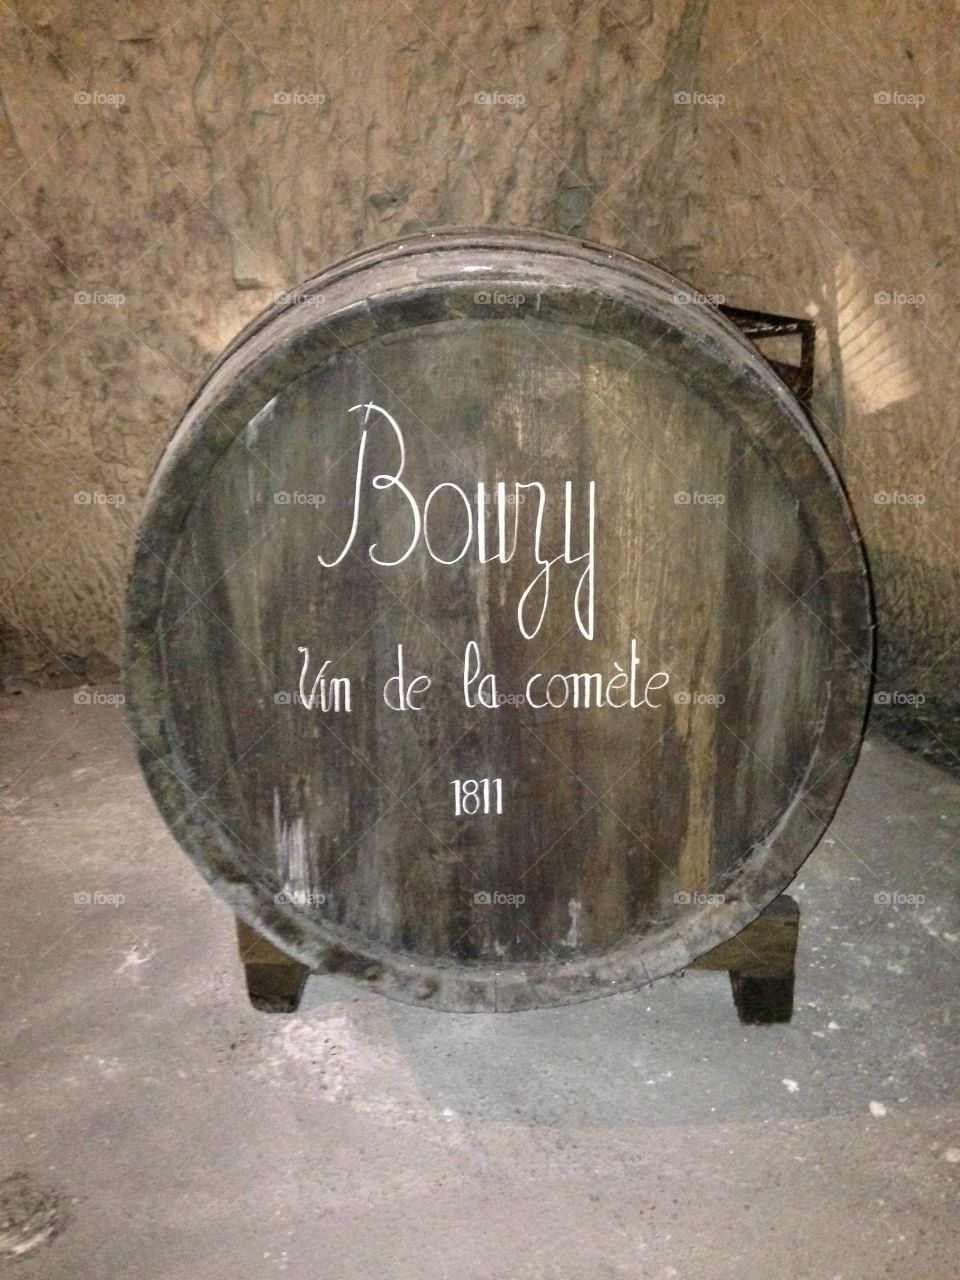 An outstanding vintage wine barrel in the caves at Veuve Cilcquot in Champagne France. The vintage of the comet 1811, which coincides with the appearance of the great comet of 1811, is one of the most famous comet wines. 